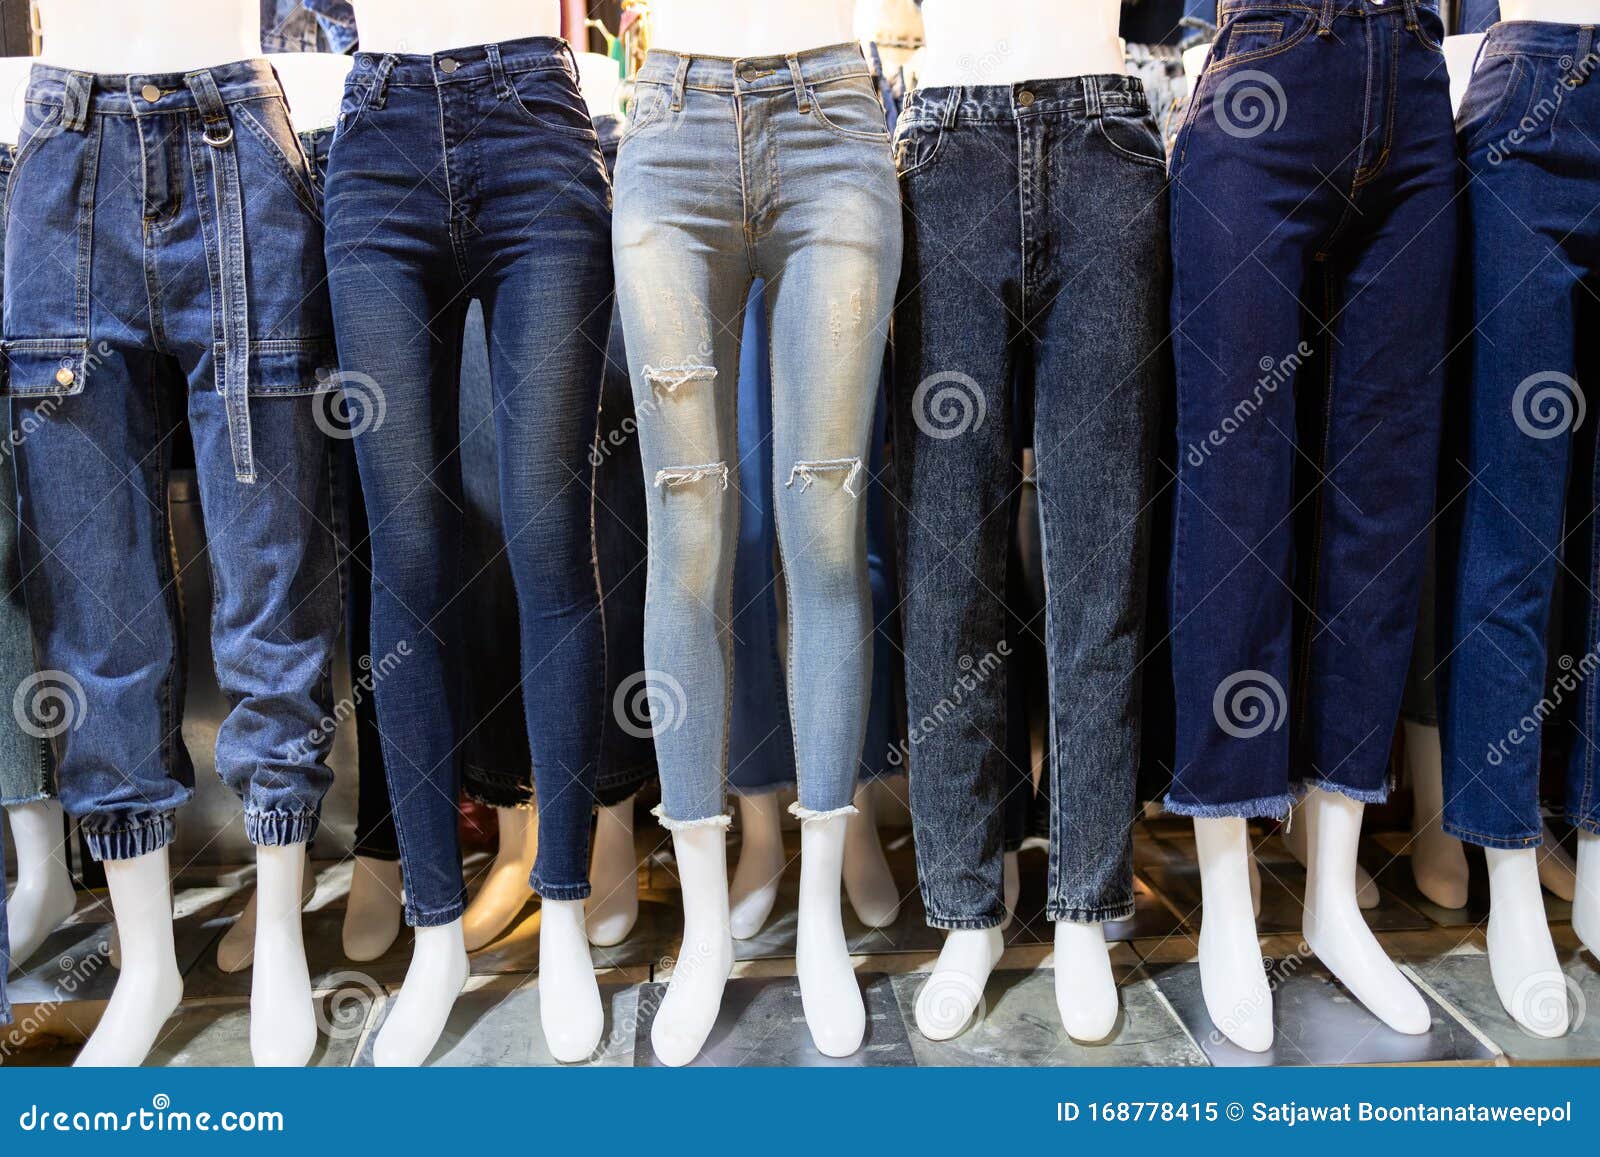 5 Types of Jeans for Men  The Right Fit for Your Body Type  TODAYS PICK  UP  UNIQLO IN